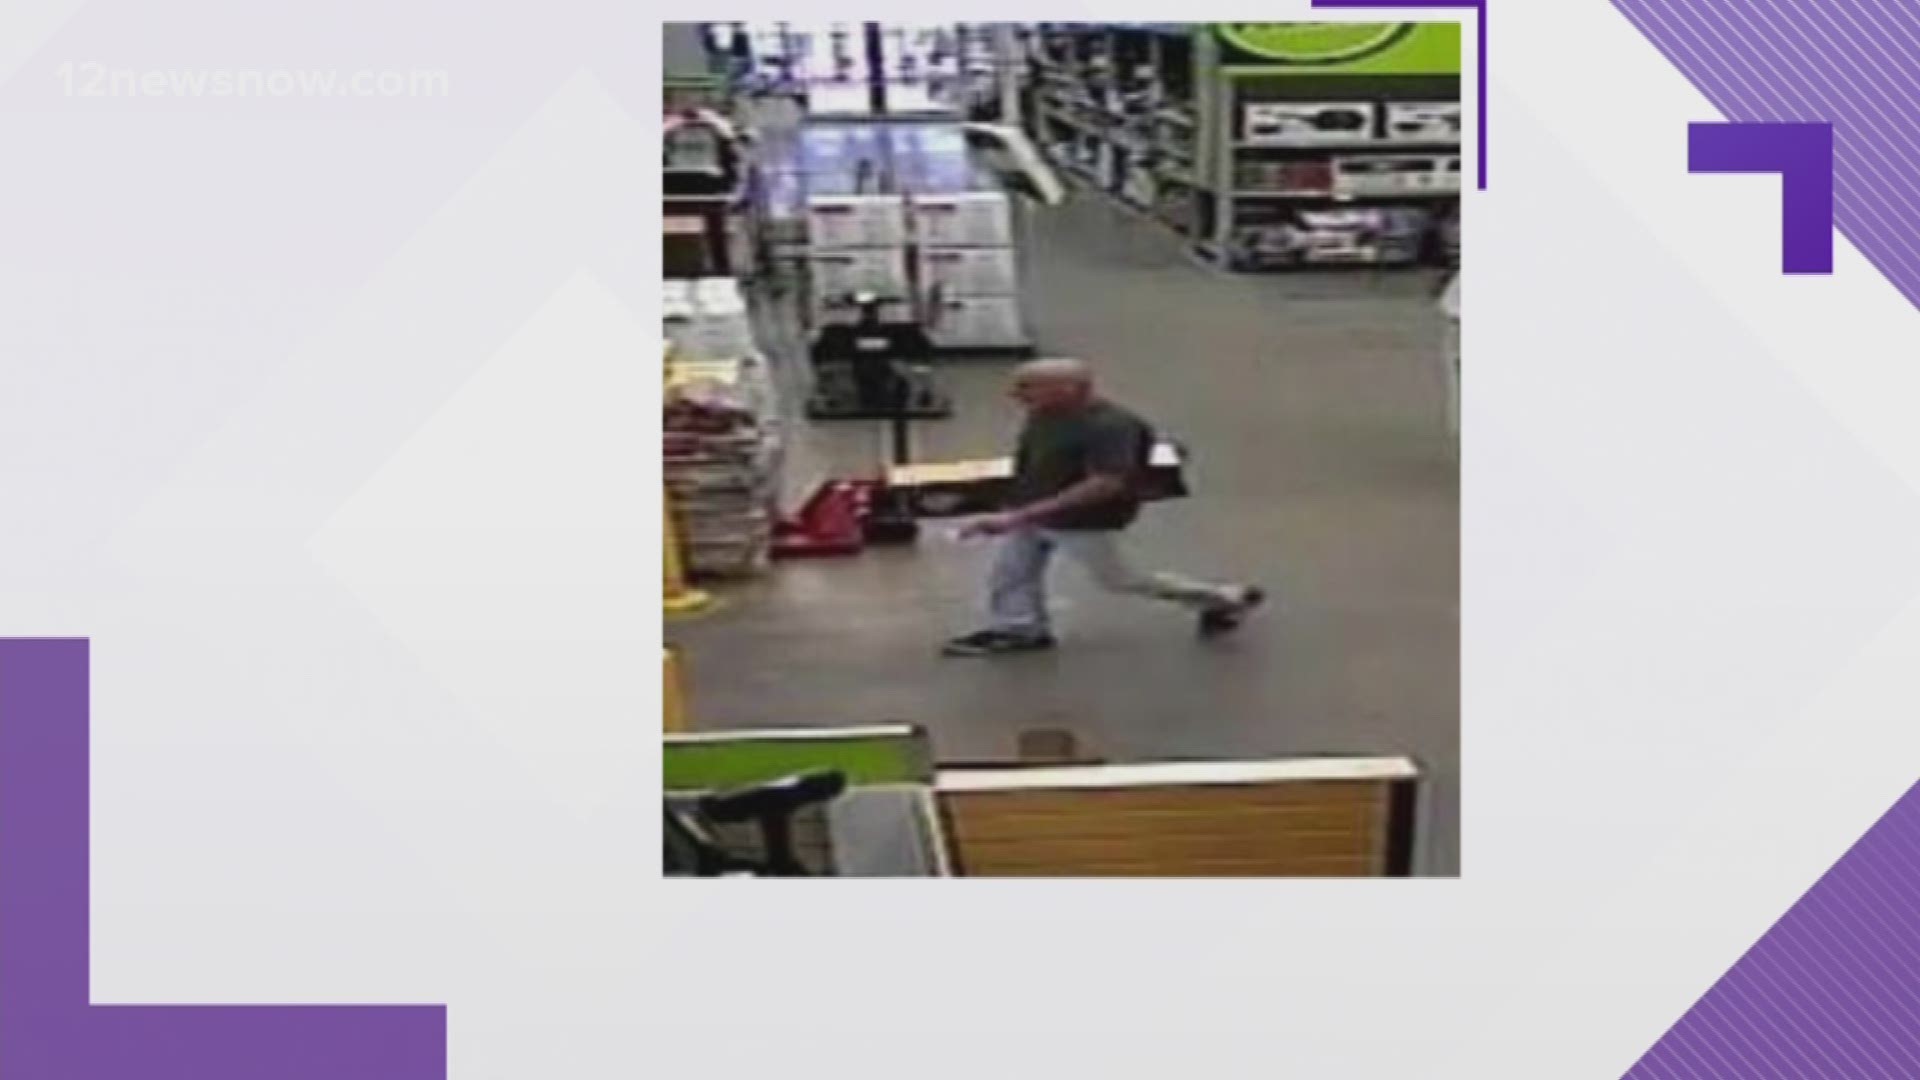 A man is seen stealing a cordless vacuum from Lowe's. Beaumont Police are asking for the public's help identifying the man